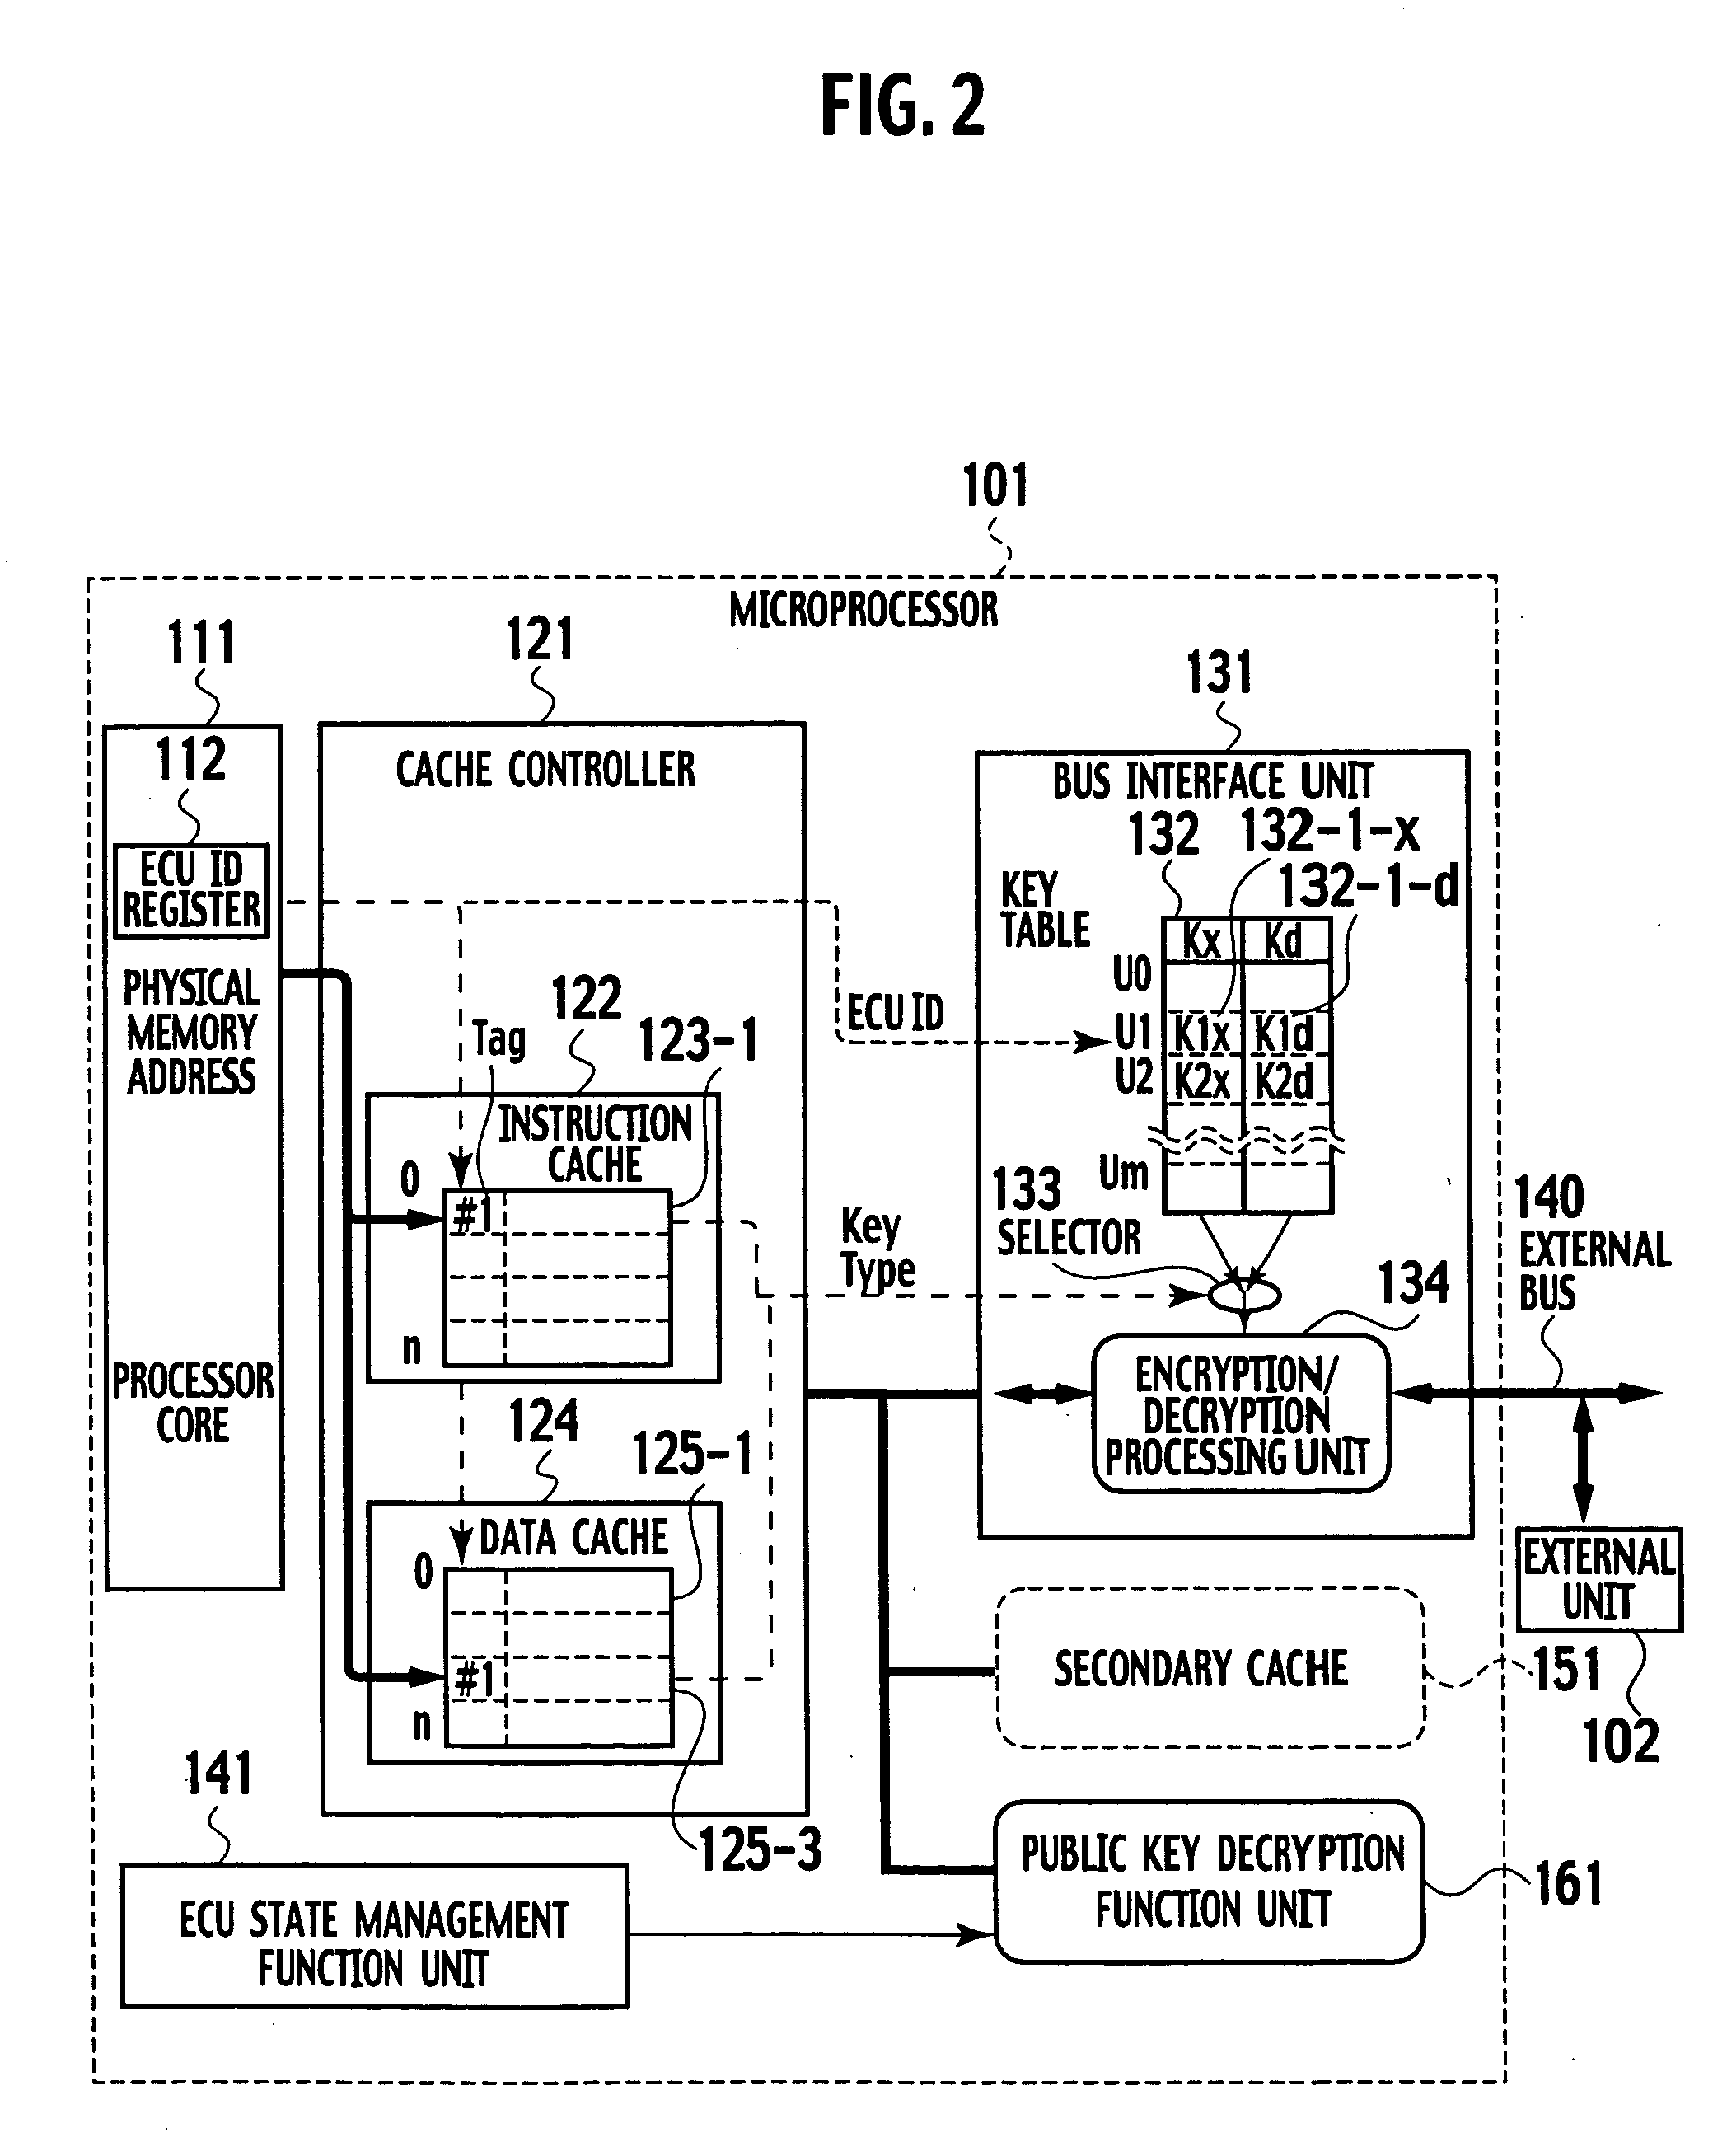 On-chip multi-core type tamper resistant microprocessor